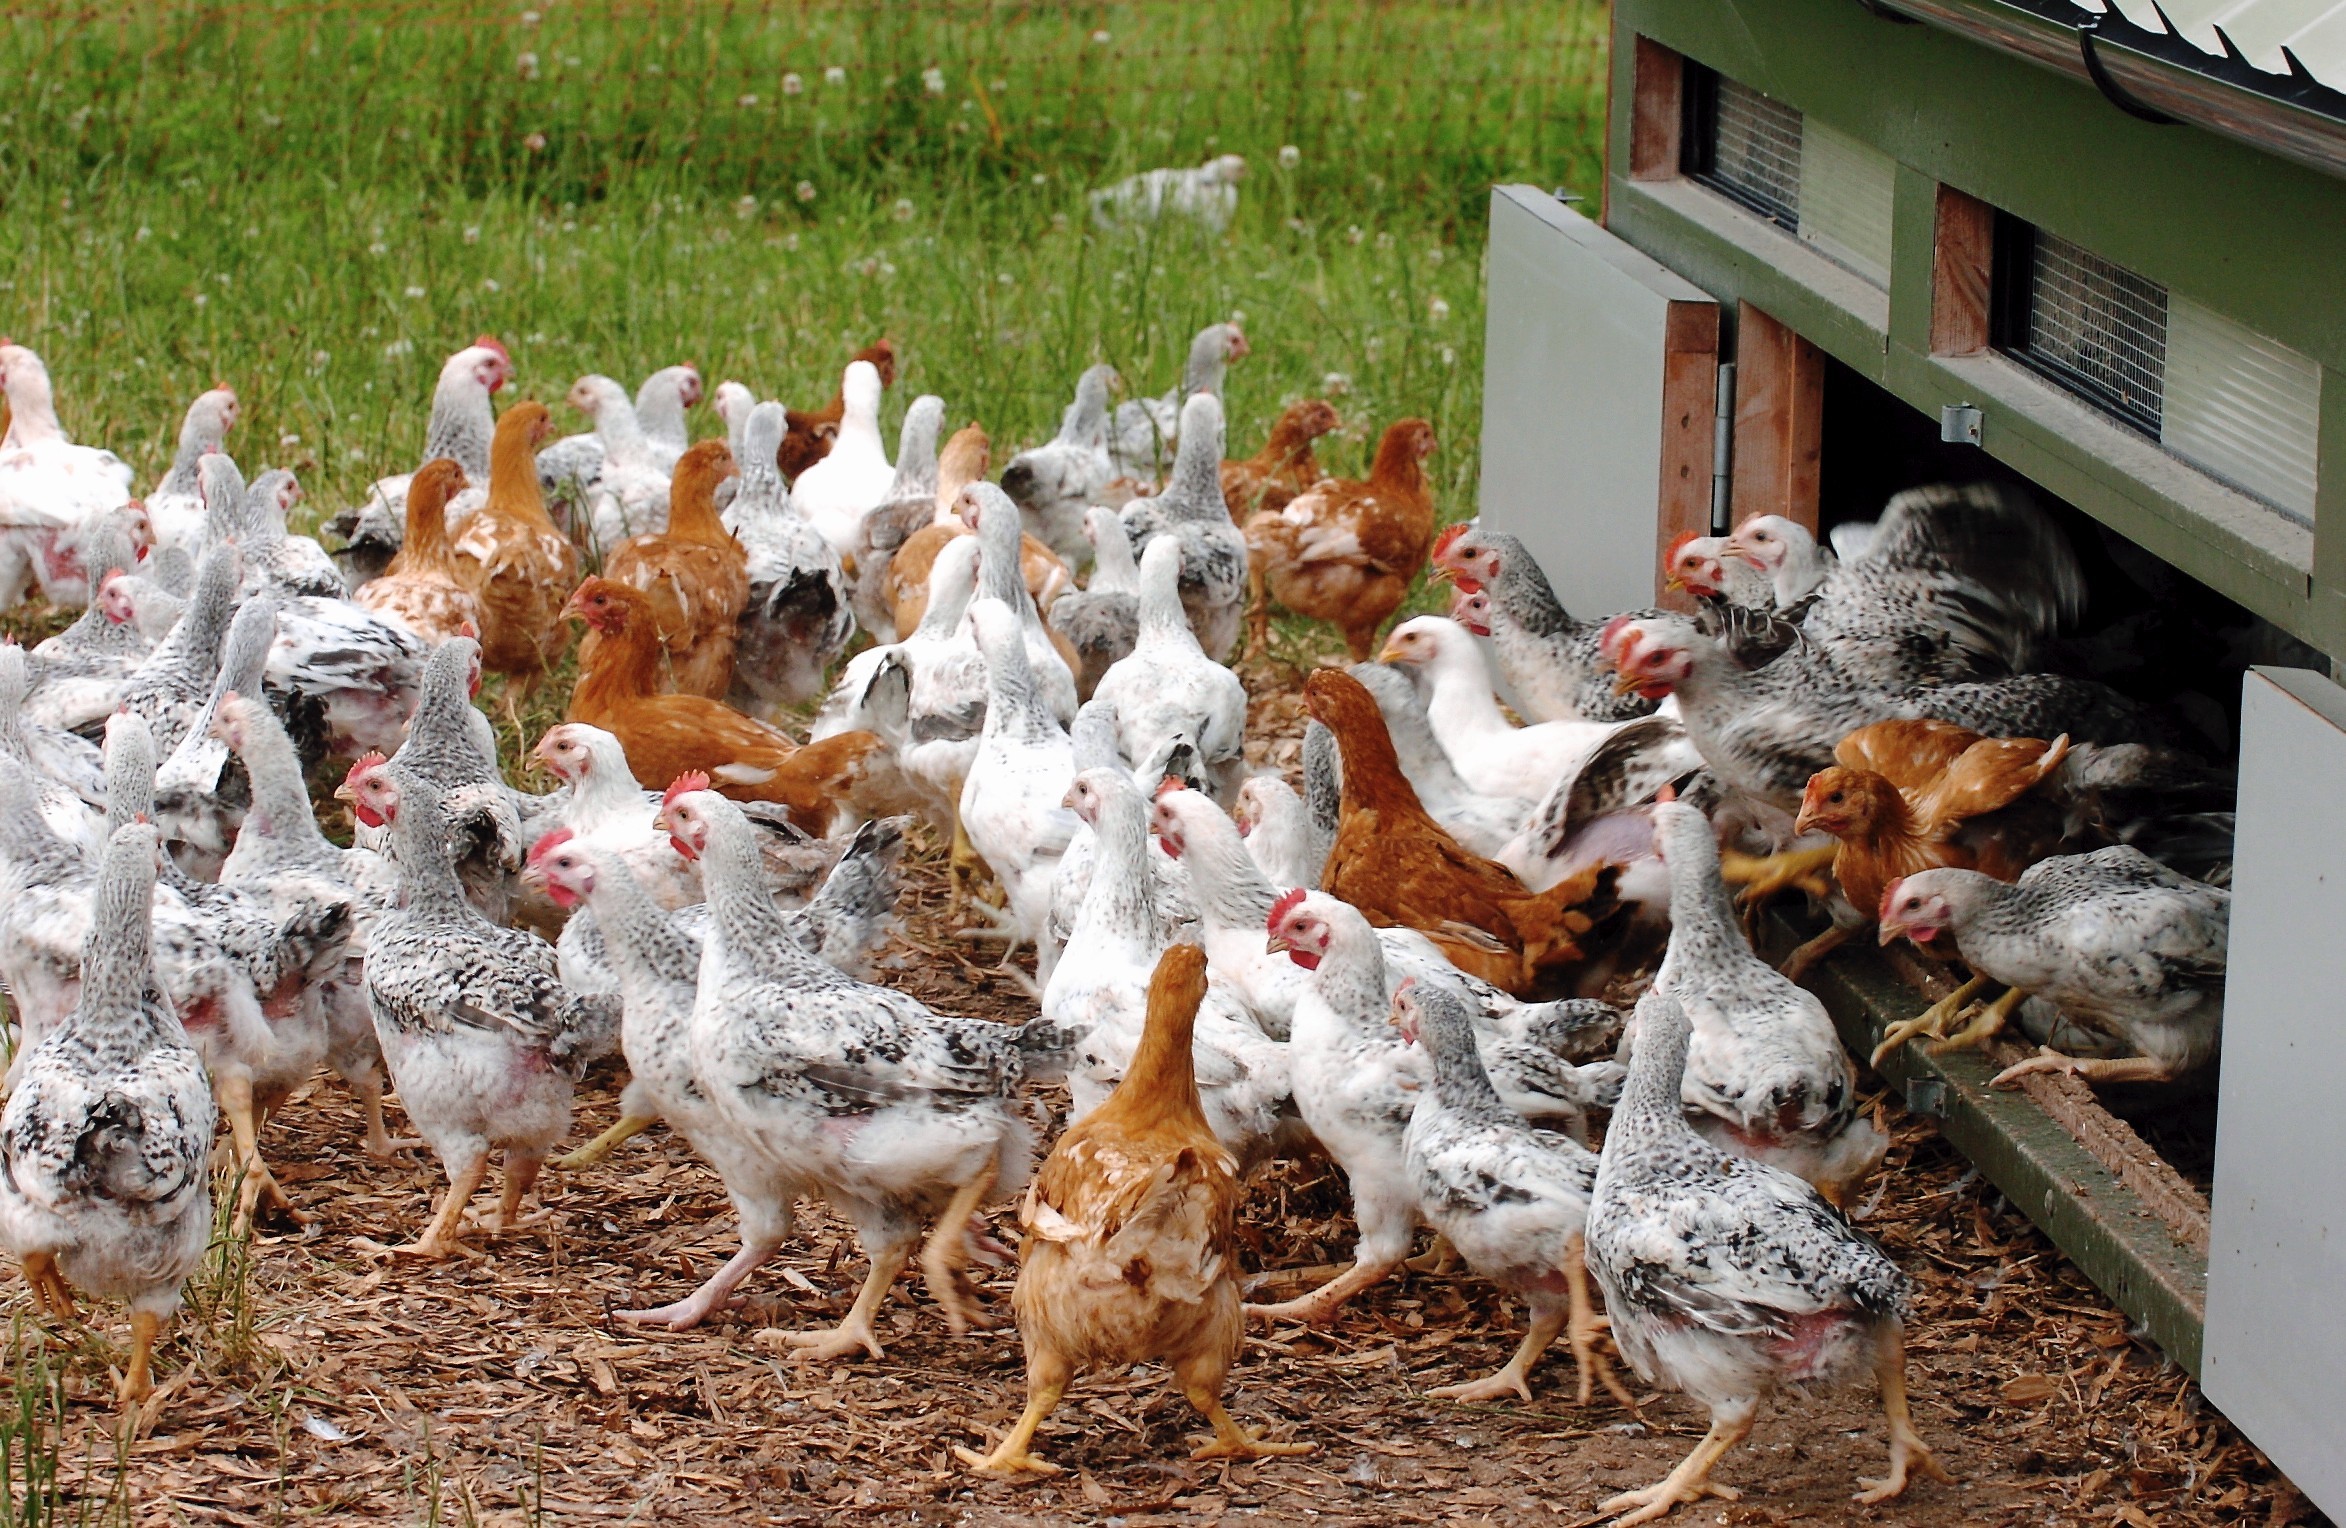 Free range poultry will have to be kept indoors for the next month